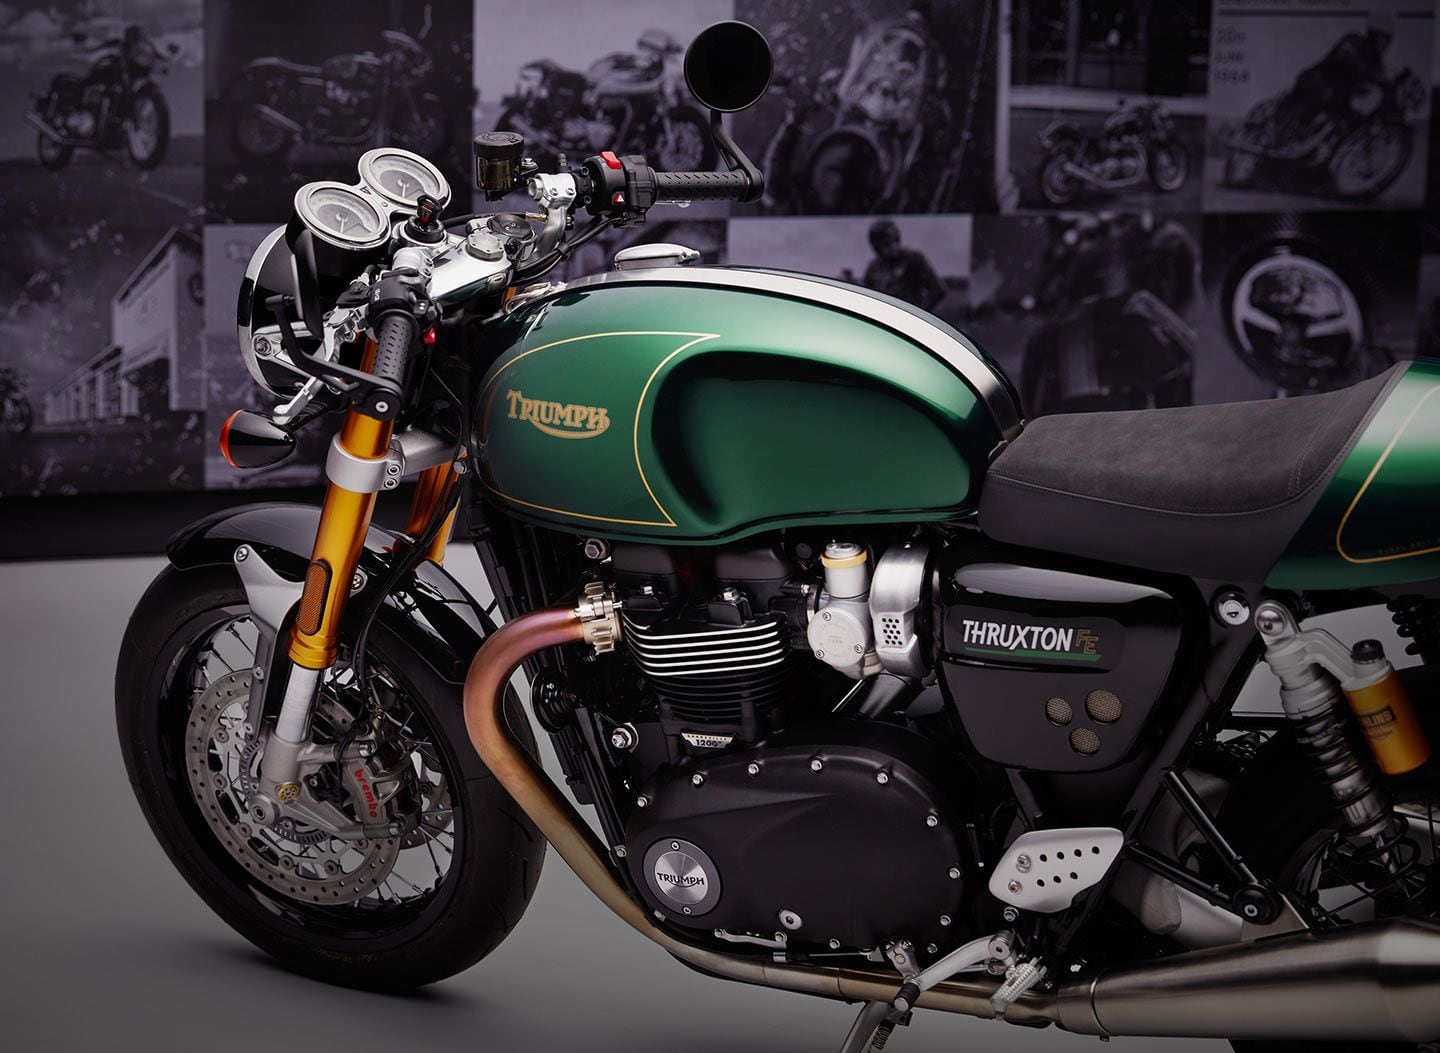 The Thruxton FE is based on the Thruxton RS model but tarts it up with a custom Competition Green paint job, special branding, and model-specific logos.